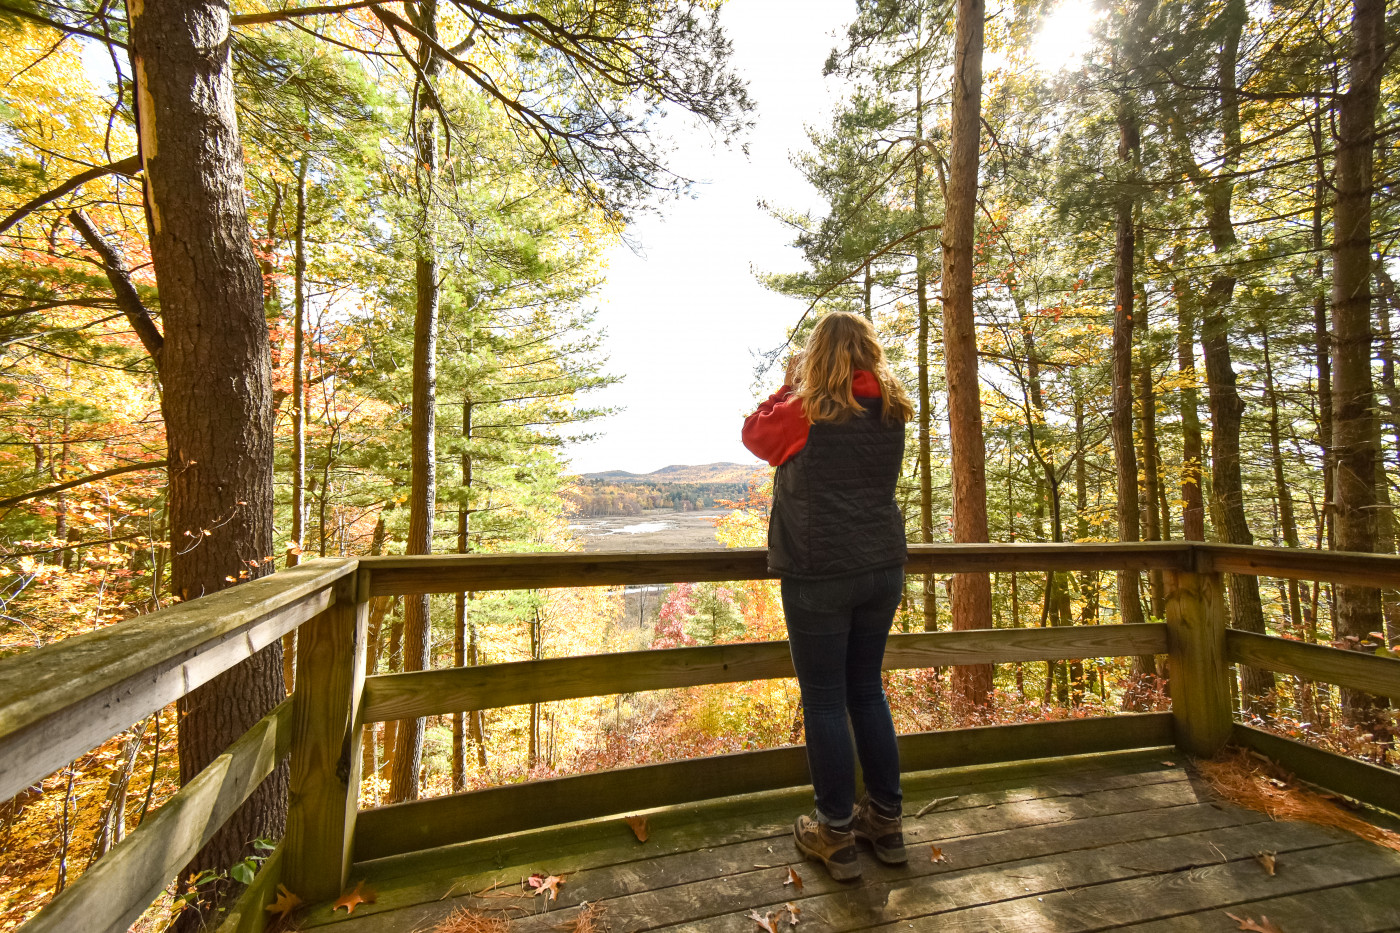 A woman with blonde hair looks through binoculars at a lookout over a marsh in fall.